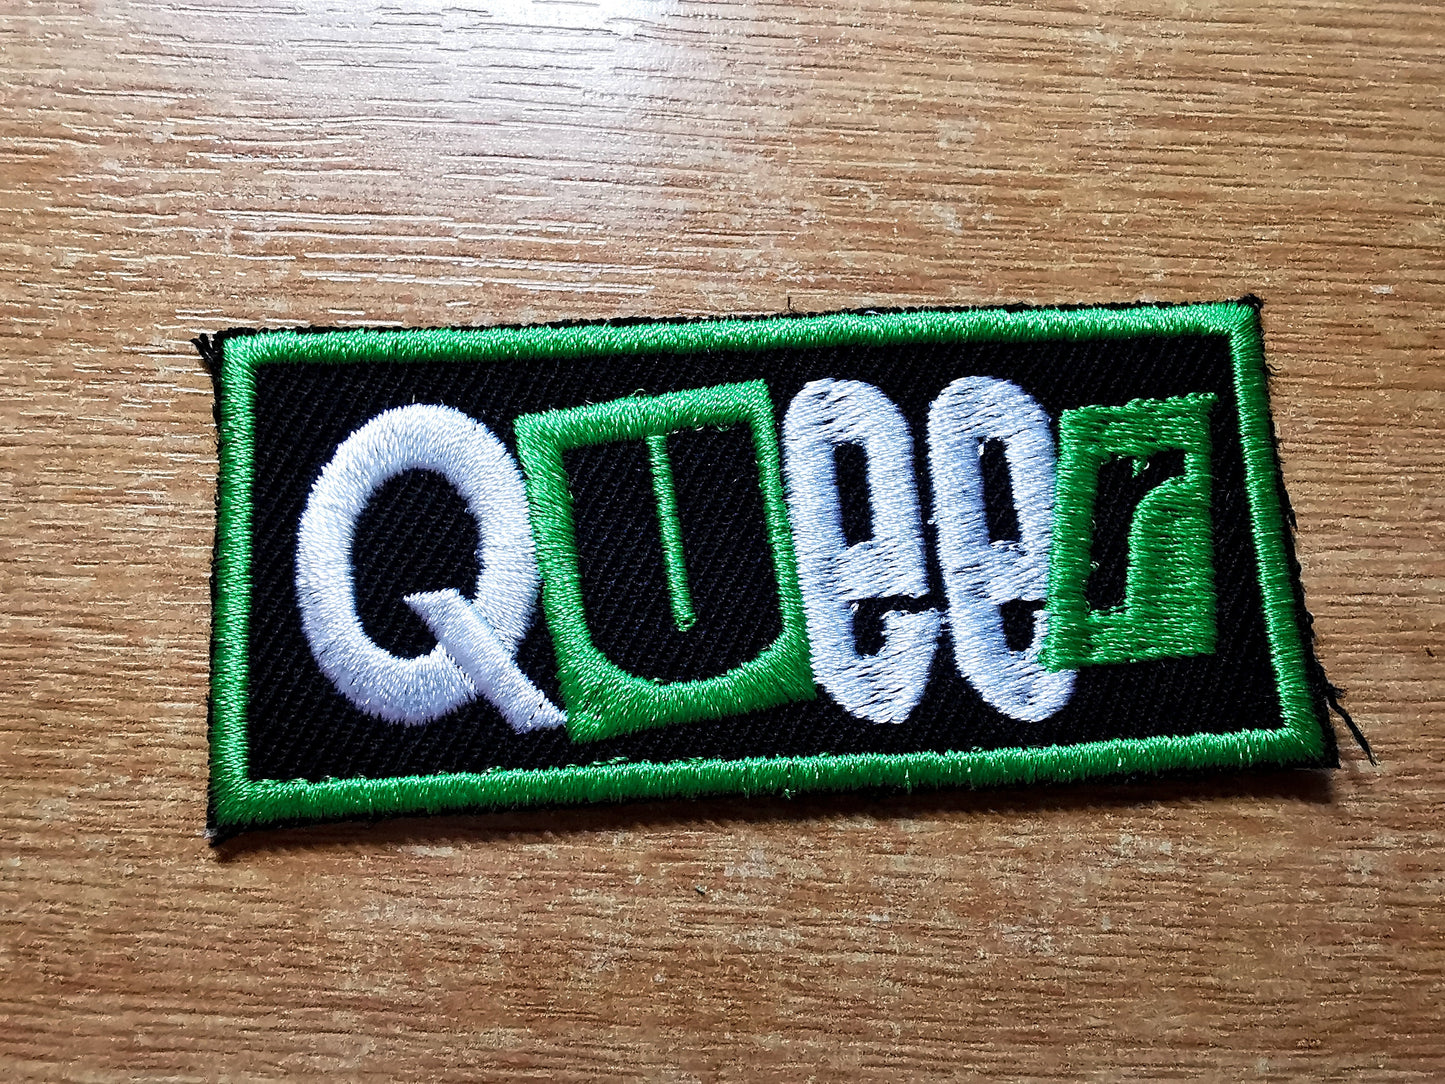 Queer Punk LGBTQ+ Iron On Patch Pride Embroidered Patches